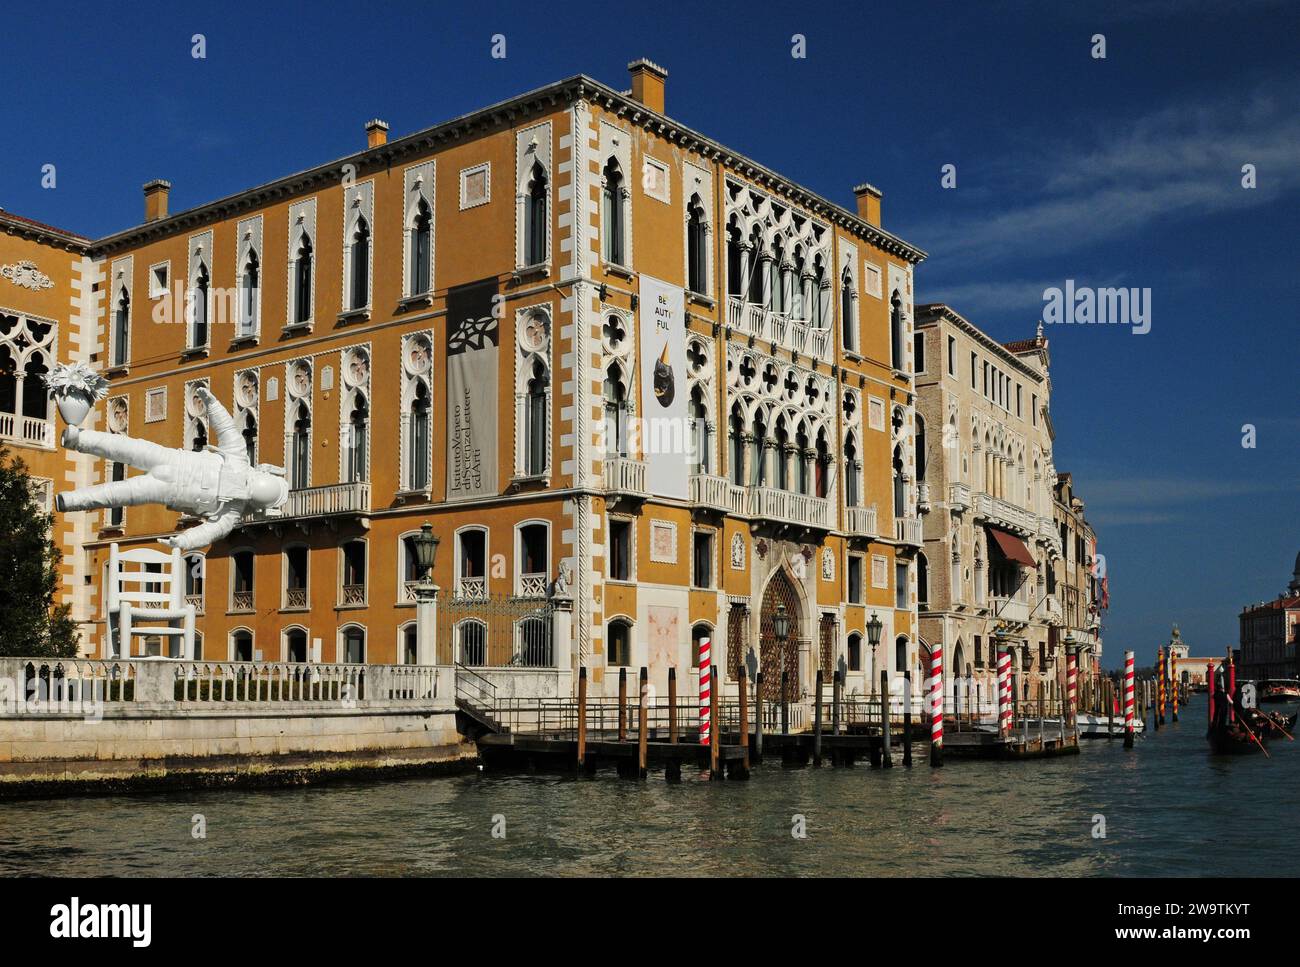 Venetian Renaissance Style Palazzo Franchetti On The Canale Grande In Venice Italy On A Wonderful Spring Day With A Few Clouds In The Sky Stock Photo